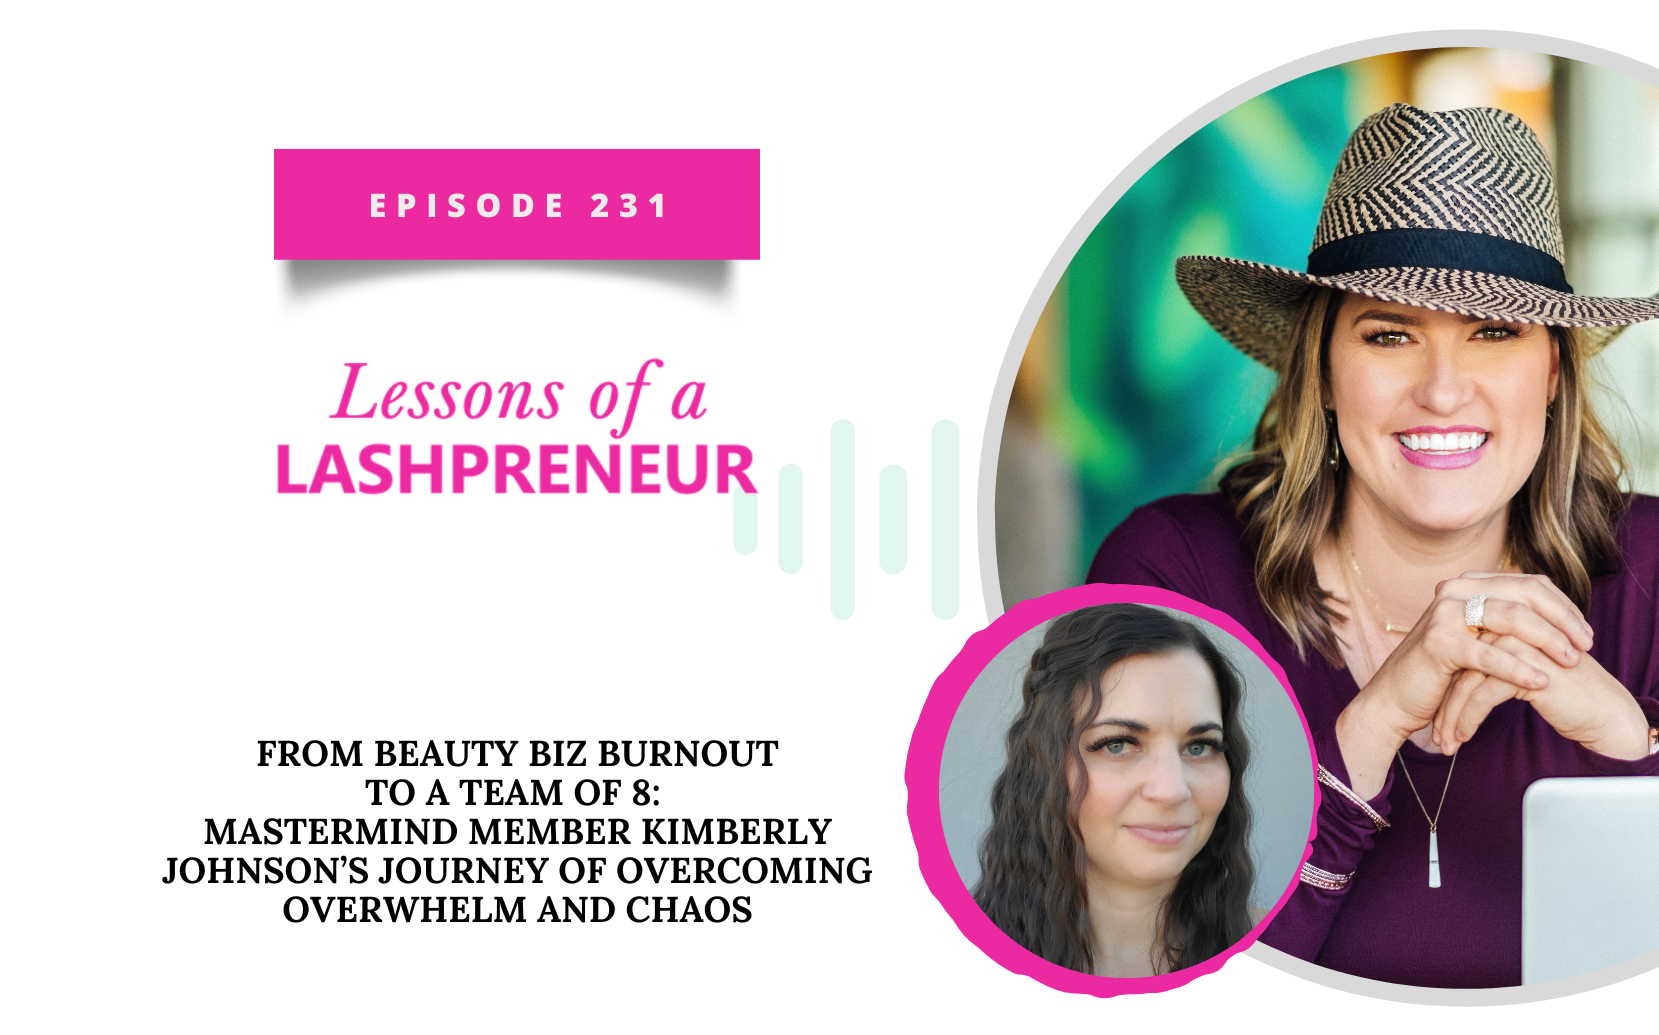 From Beauty Biz Burnout to a Team of 8: Mastermind Member Kimberly Johnson’s Journey of Overcoming Overwhelm and Chaos